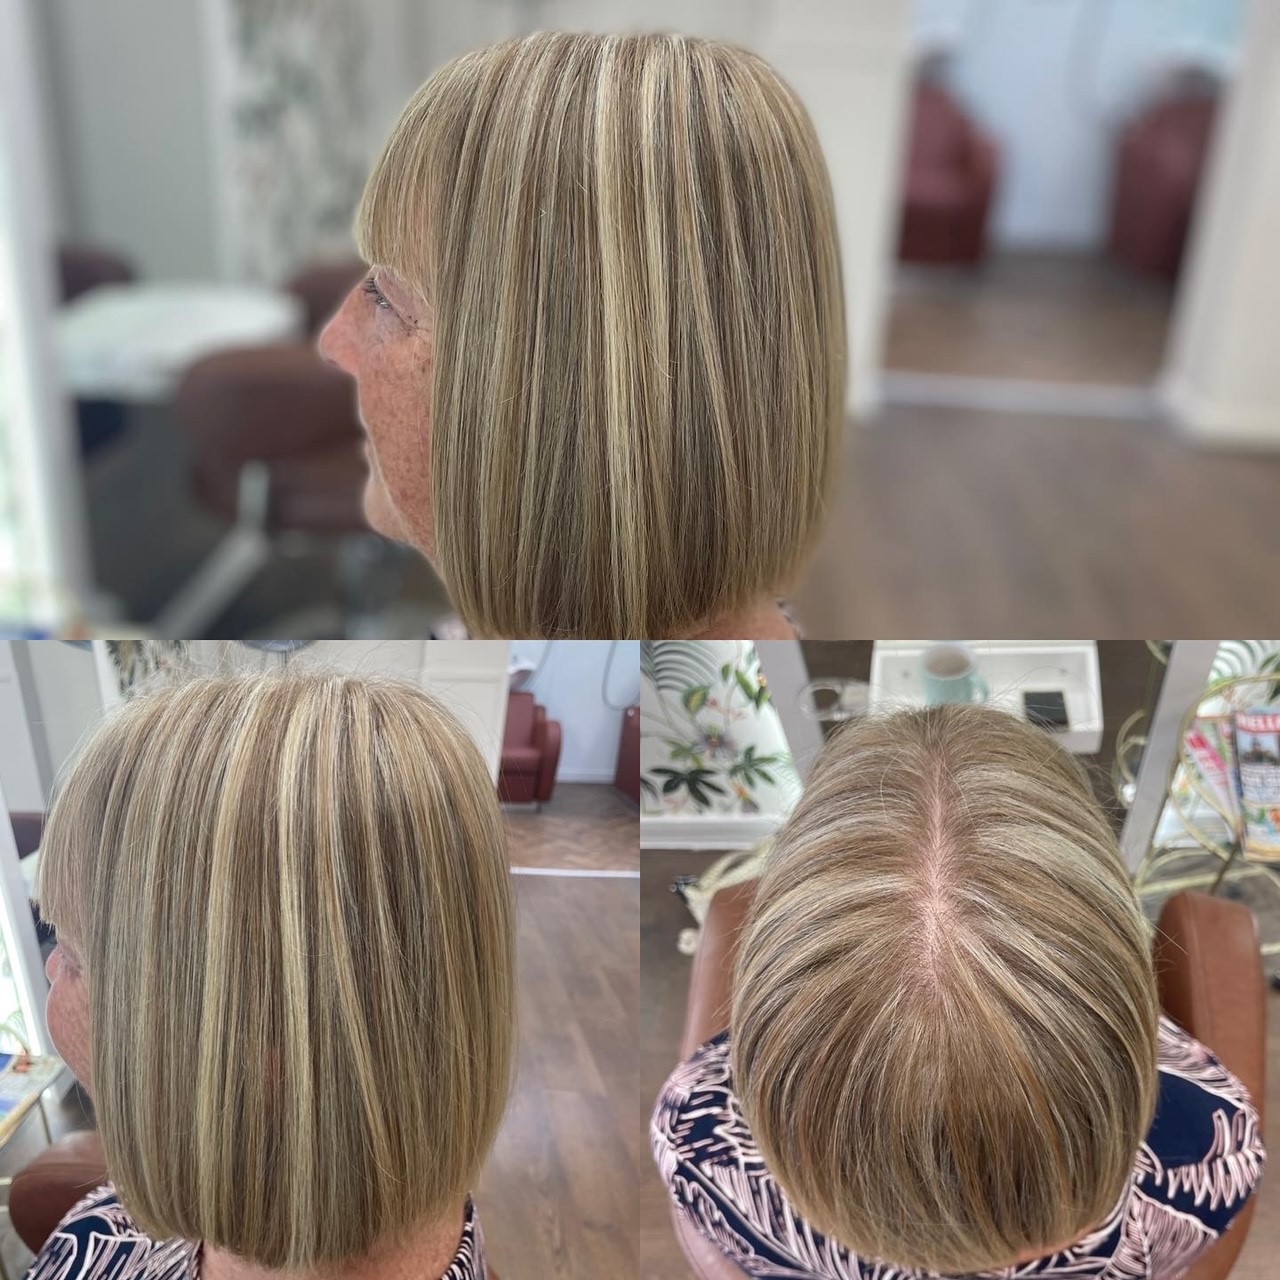 Highlights and blunt bob